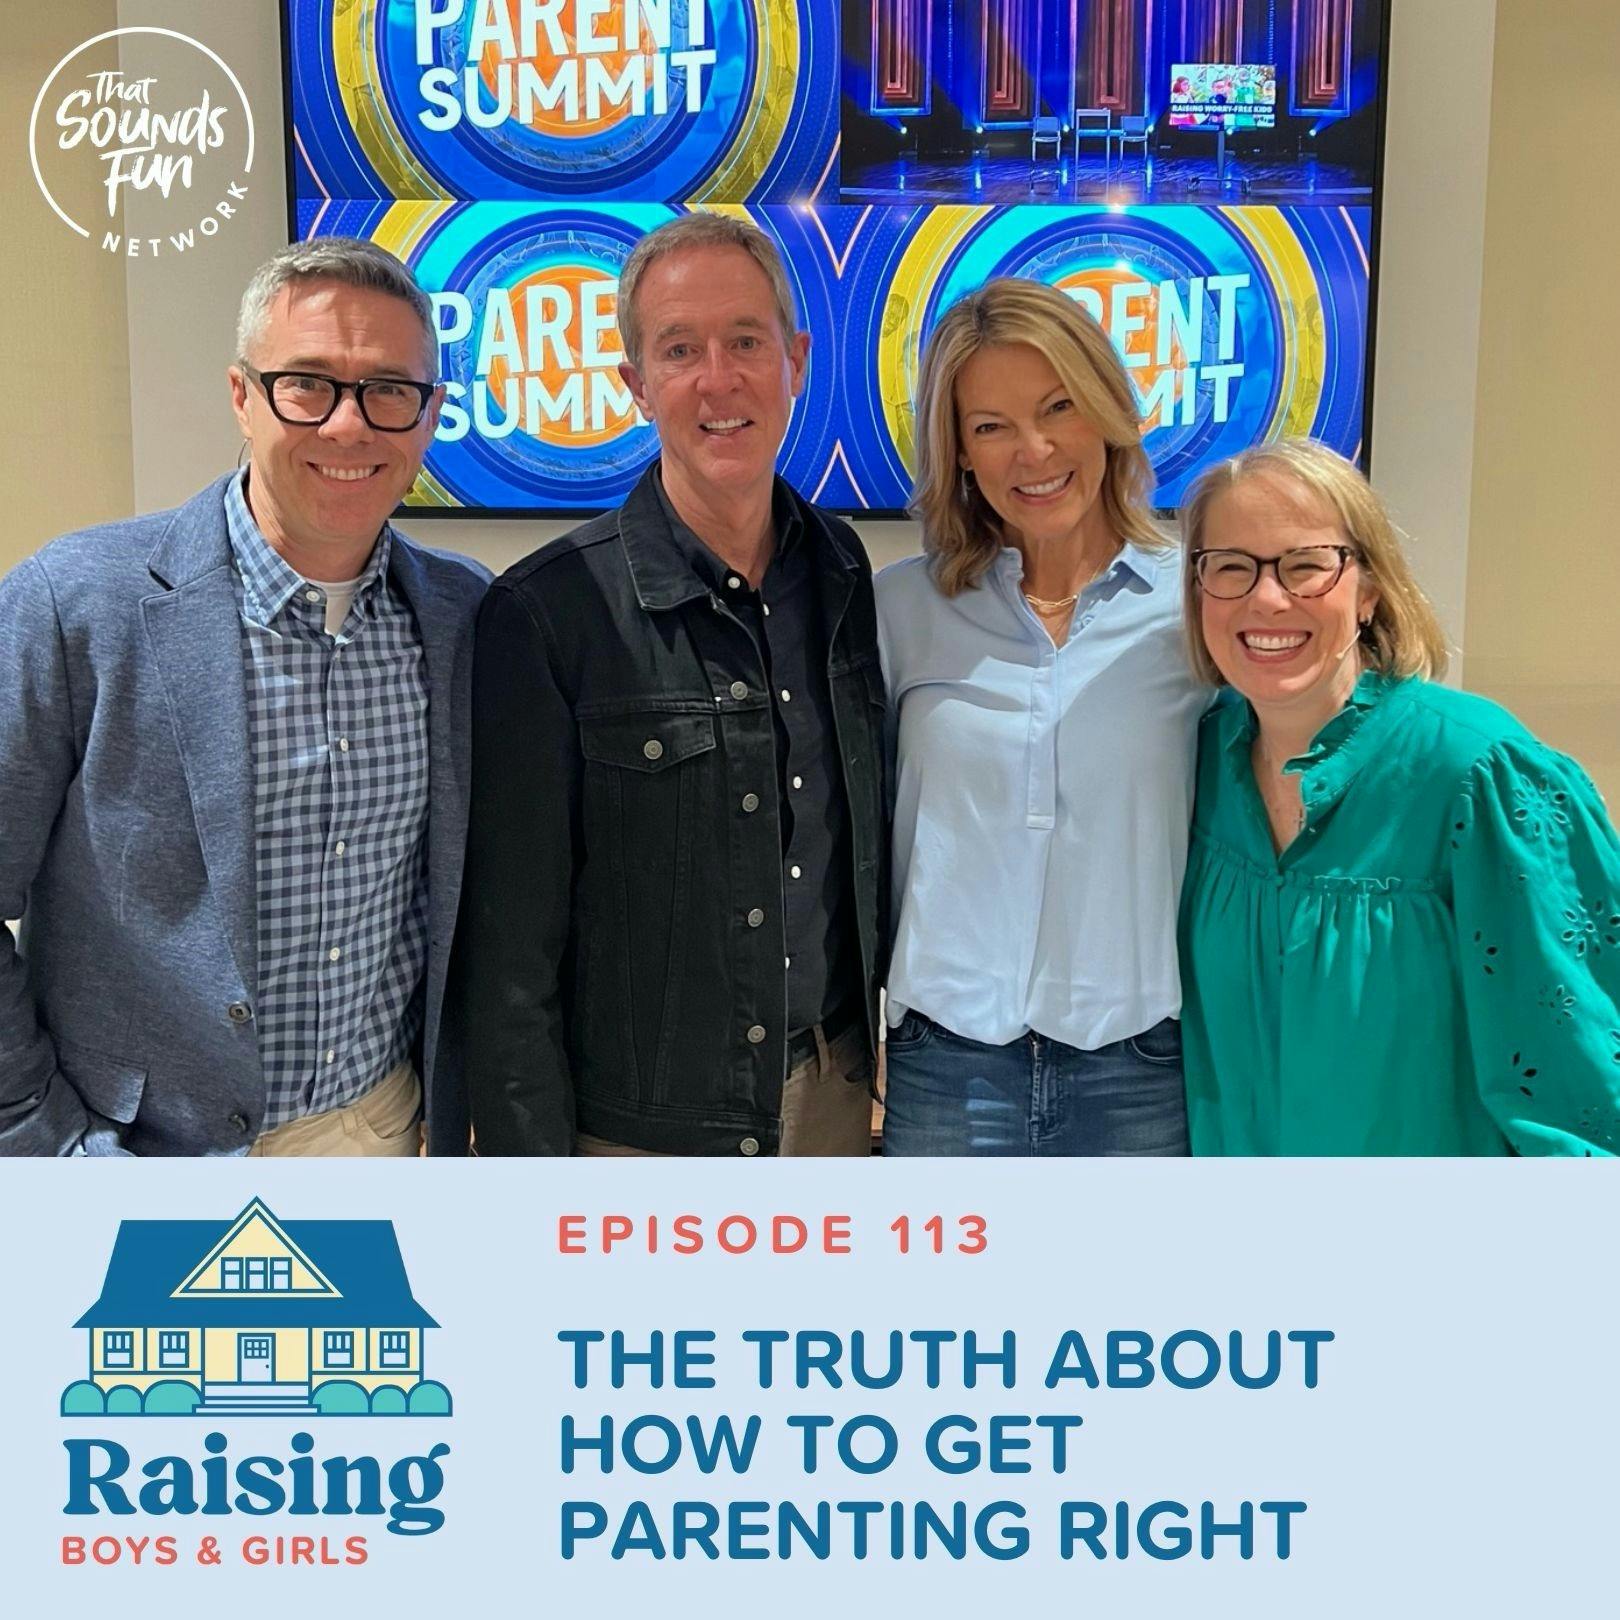 Episode 113: The Truth About How to Get Parenting Right